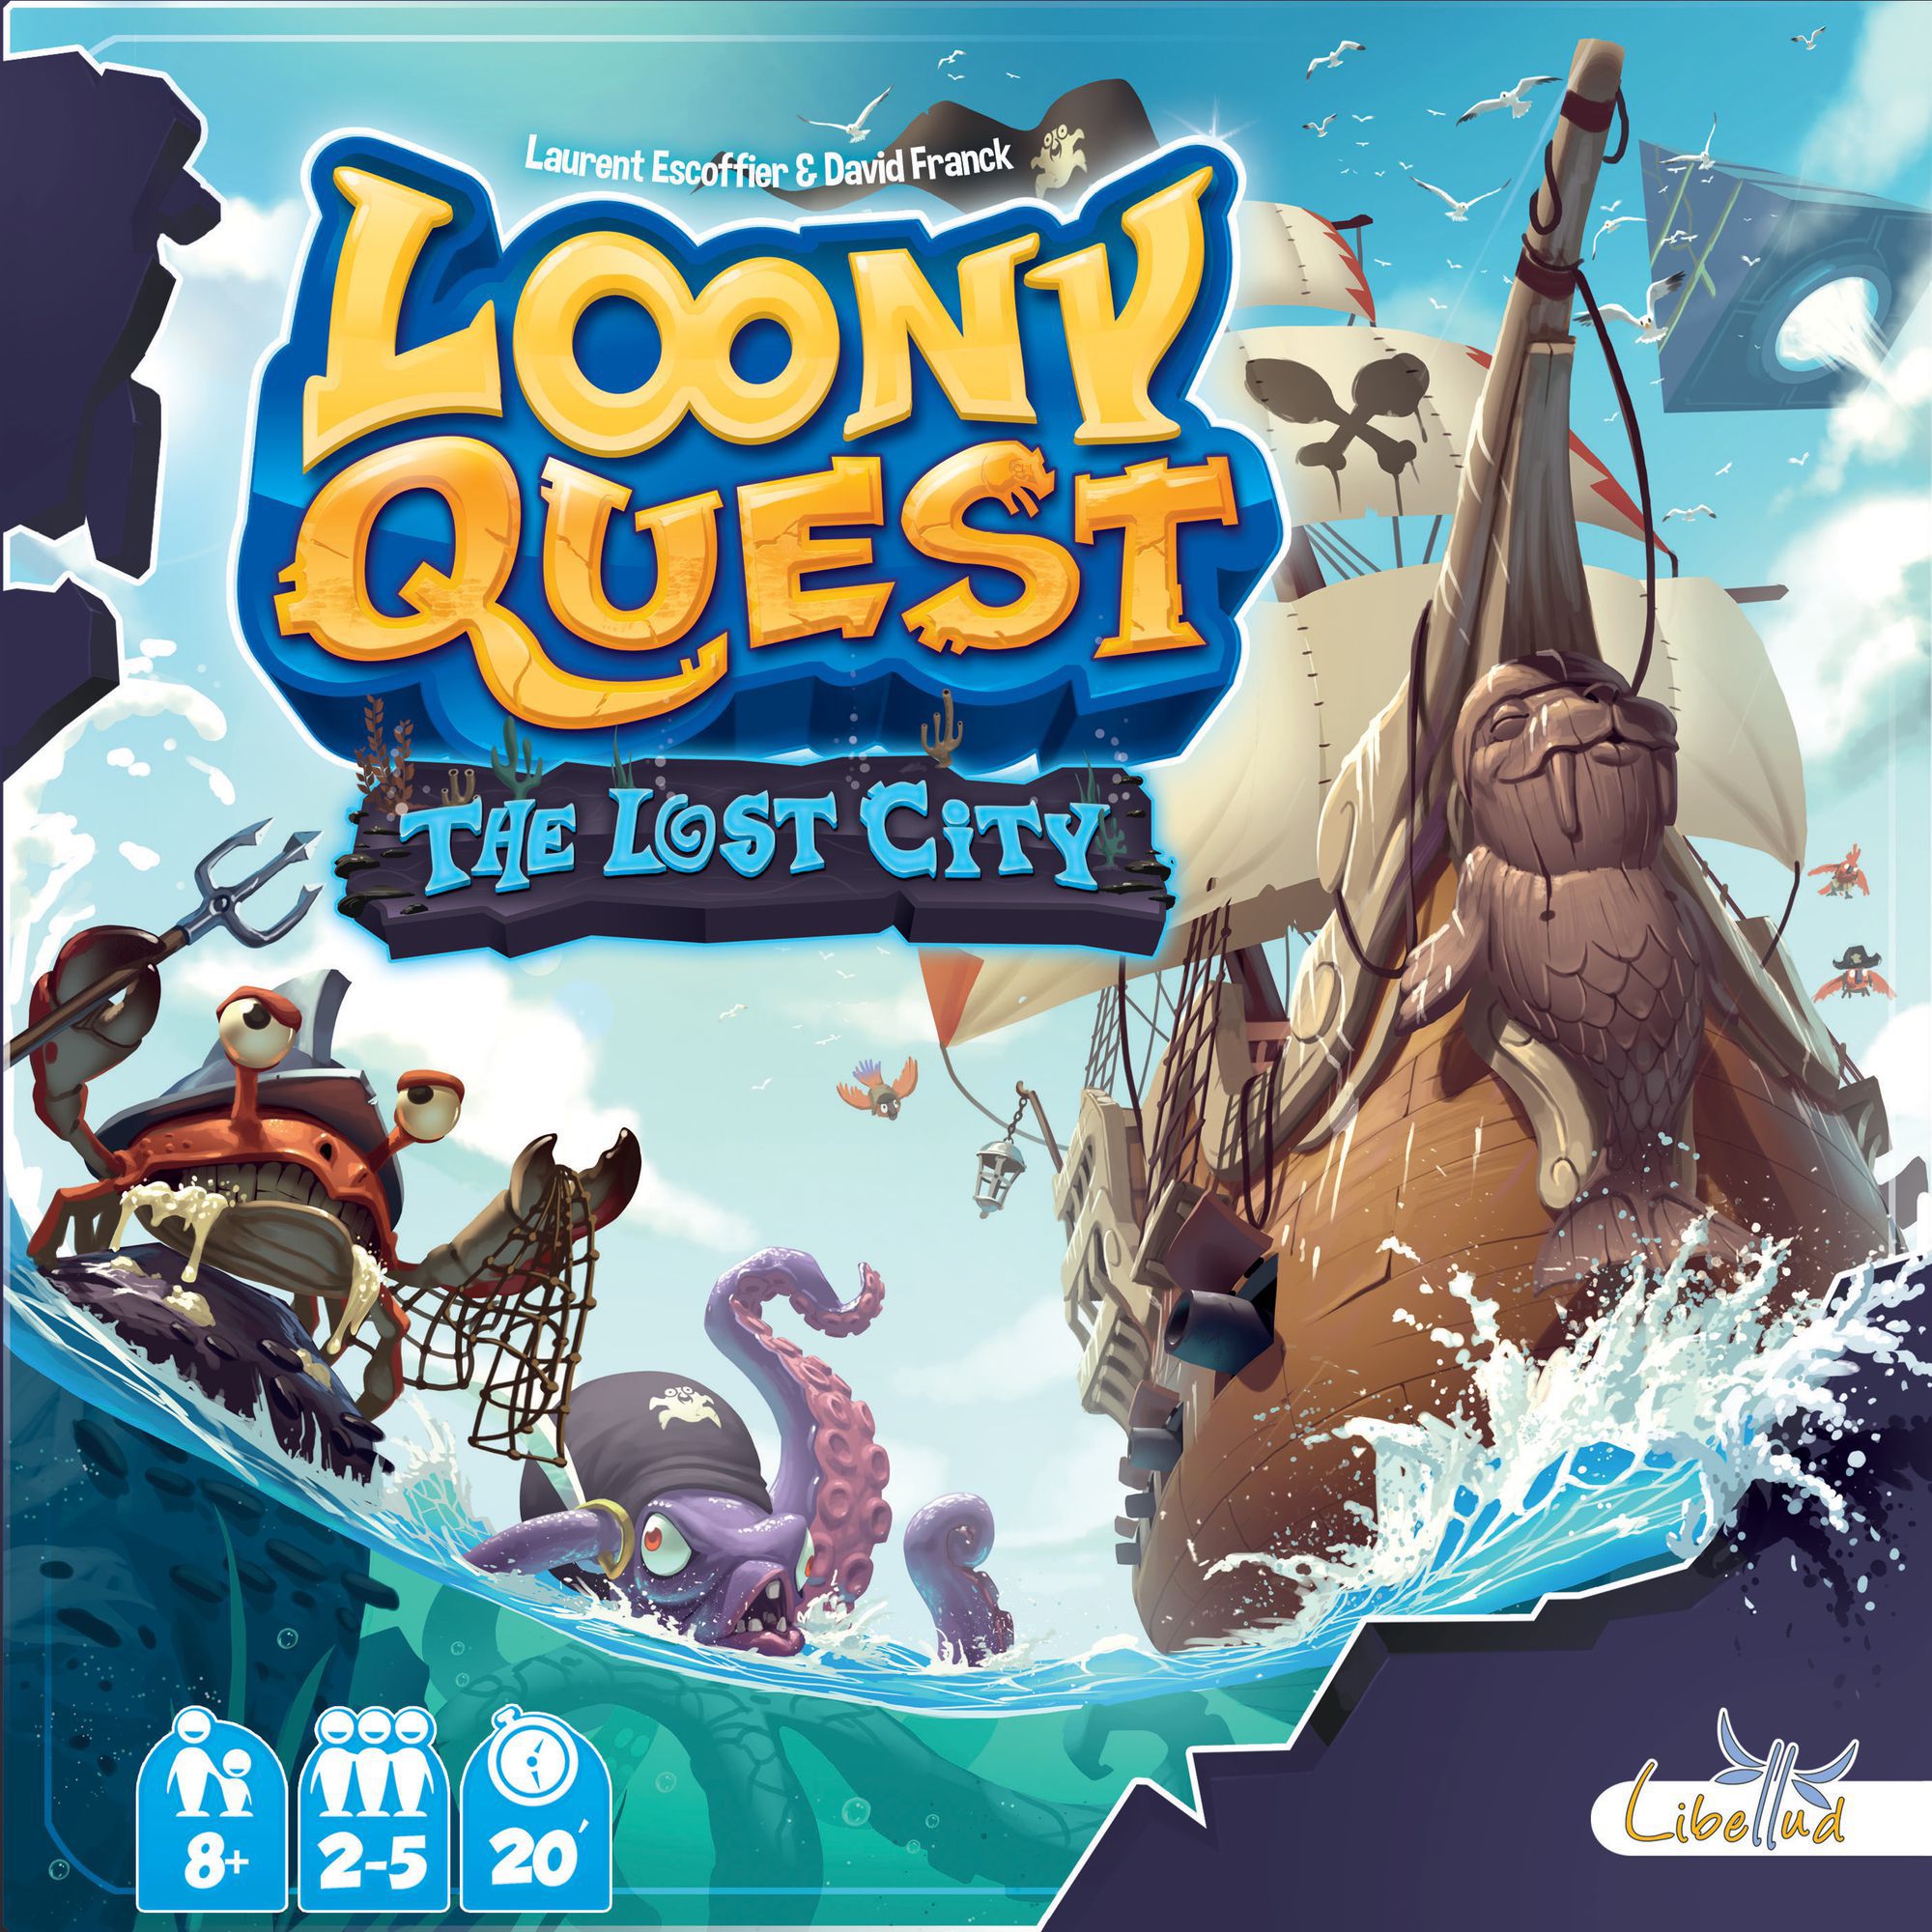 Loony Quest - The lost city